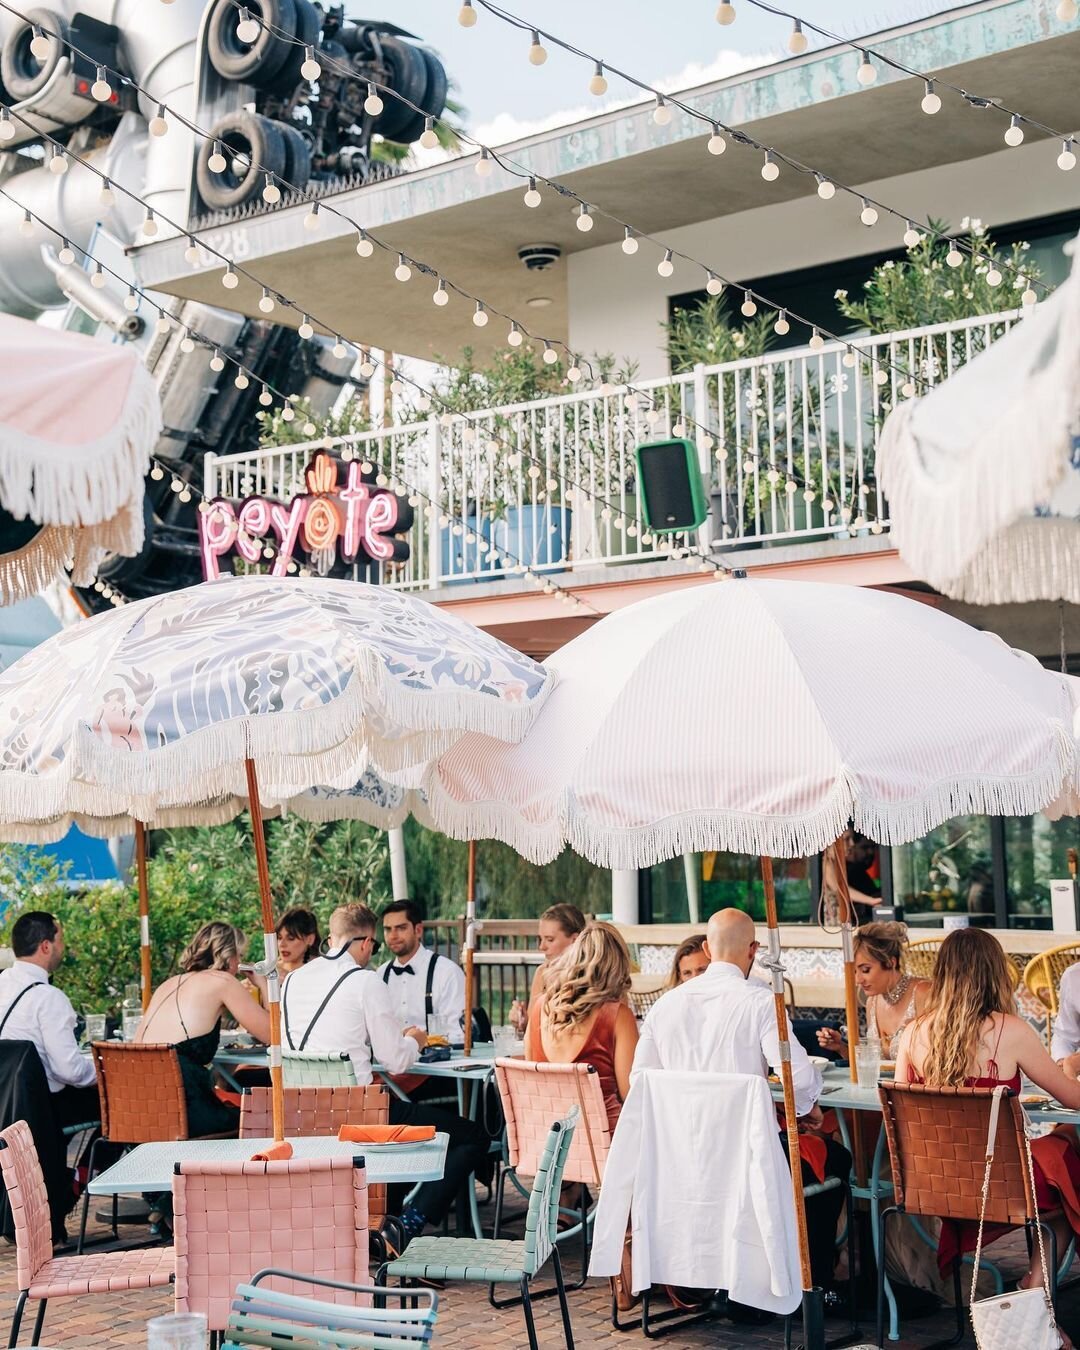 💘 Pro tip from wedding photo/video company @brazenhoneyfilms: &quot;Booking a private patio section or bar downtown will be more affordable and way more fun than an expensive restaurant on the strip.&quot;

Book your wedding or private event with us